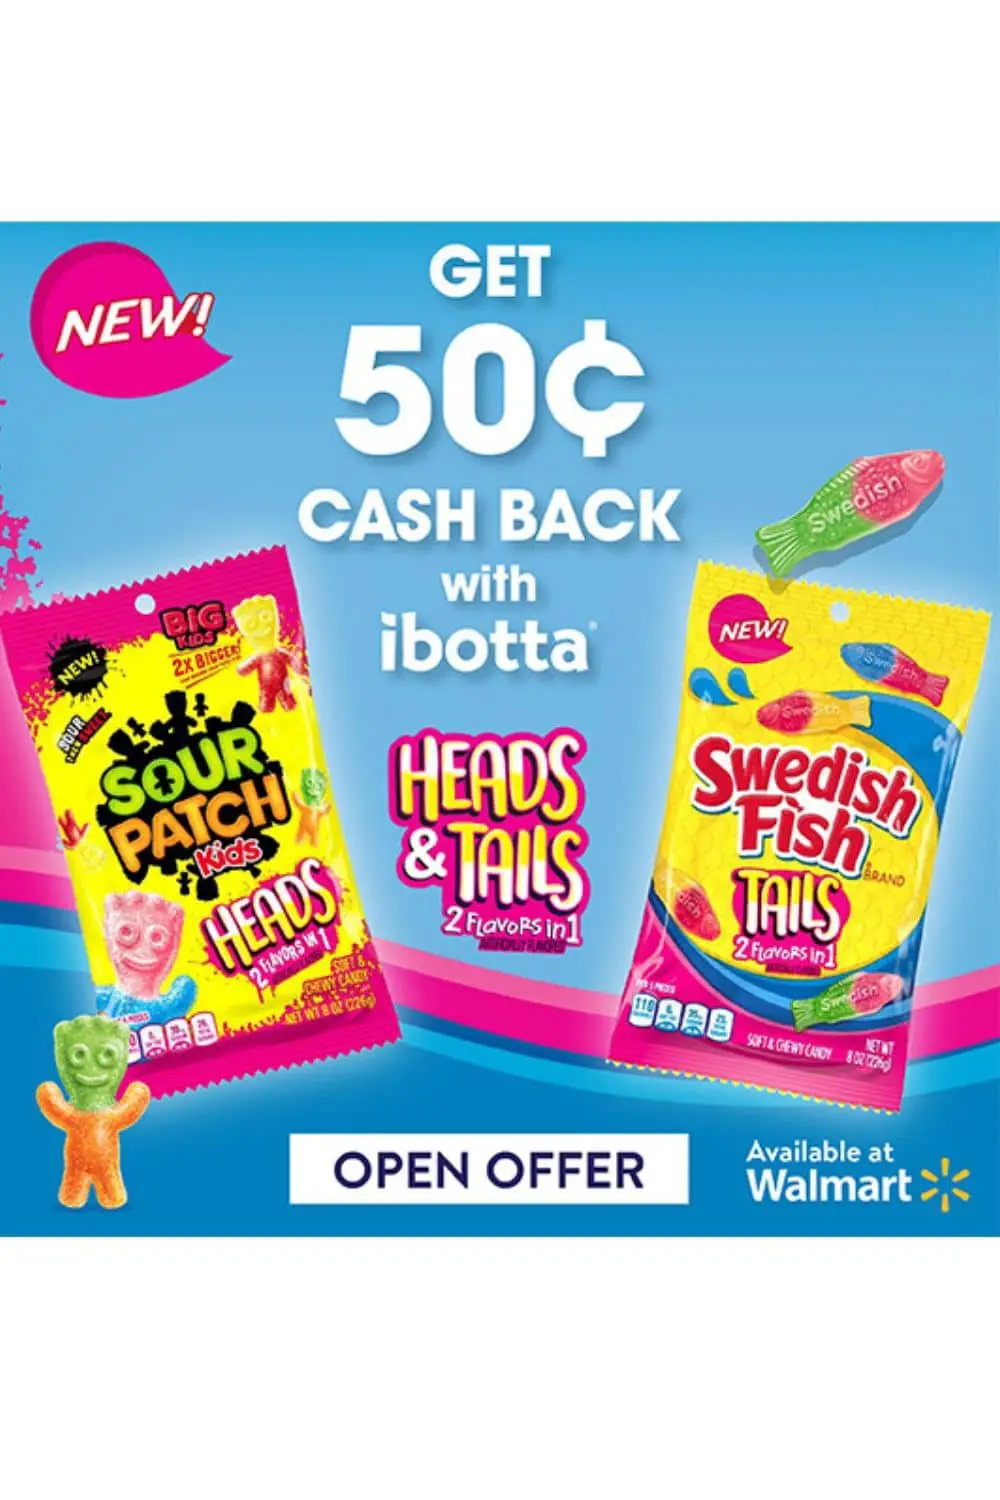 Sour Patch Kids Heads & Swedish Fish Tails Now Available At Walmart **ibotta offer**